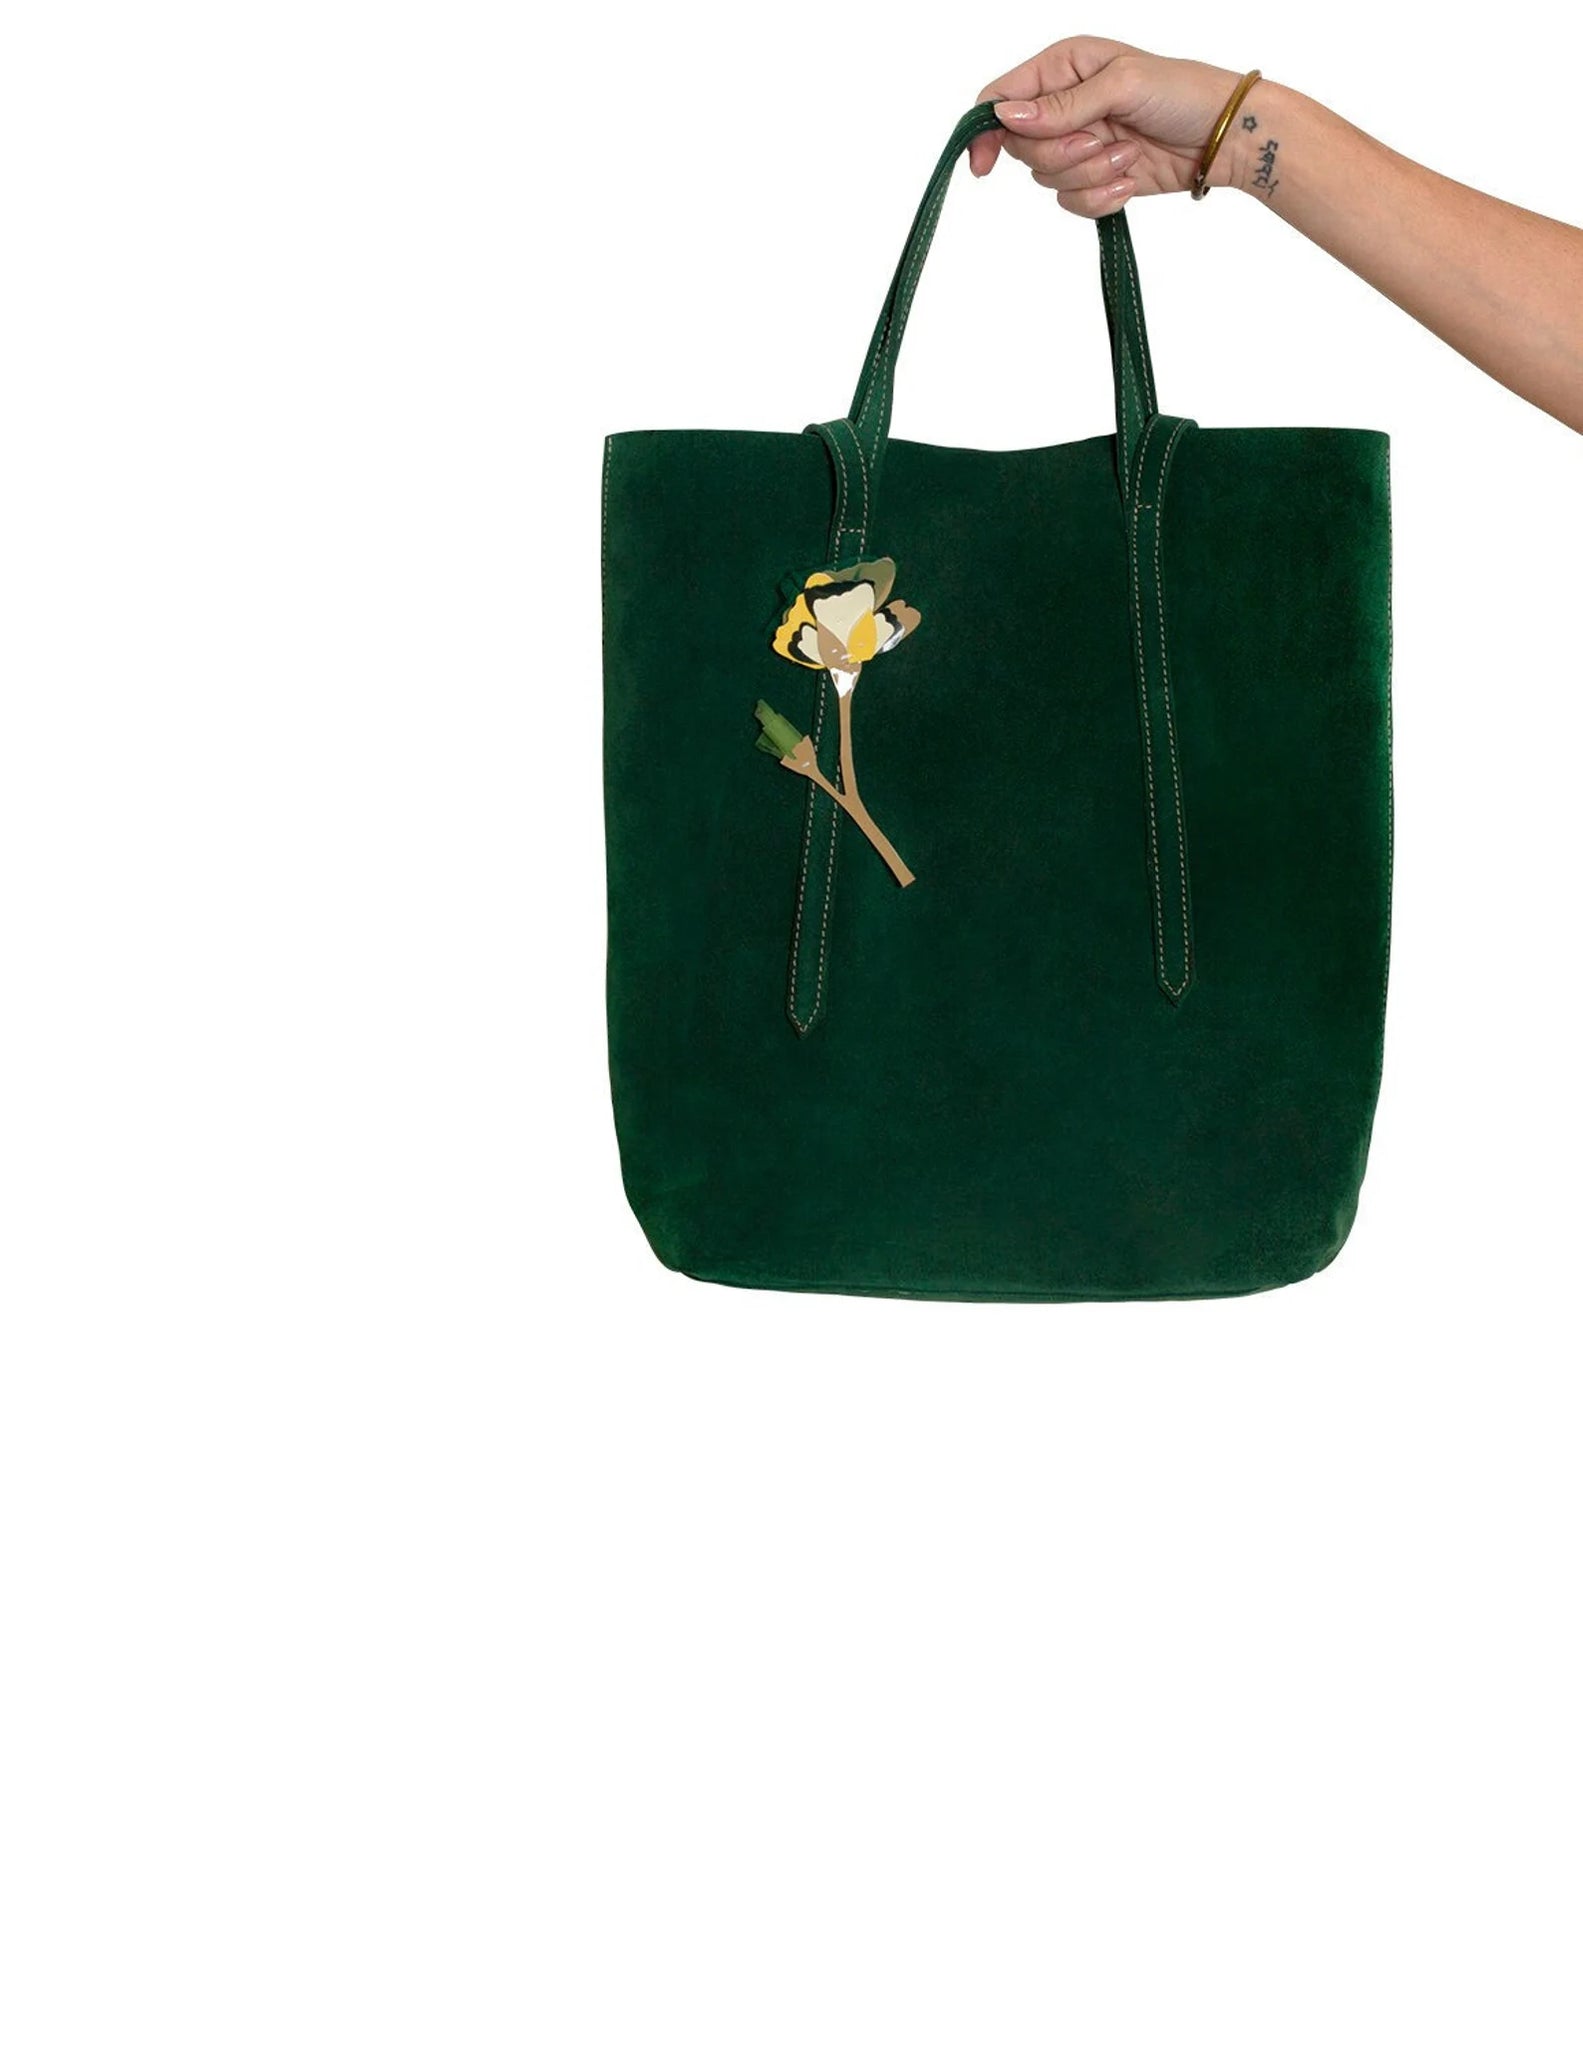 Forest green suede leather tote bag